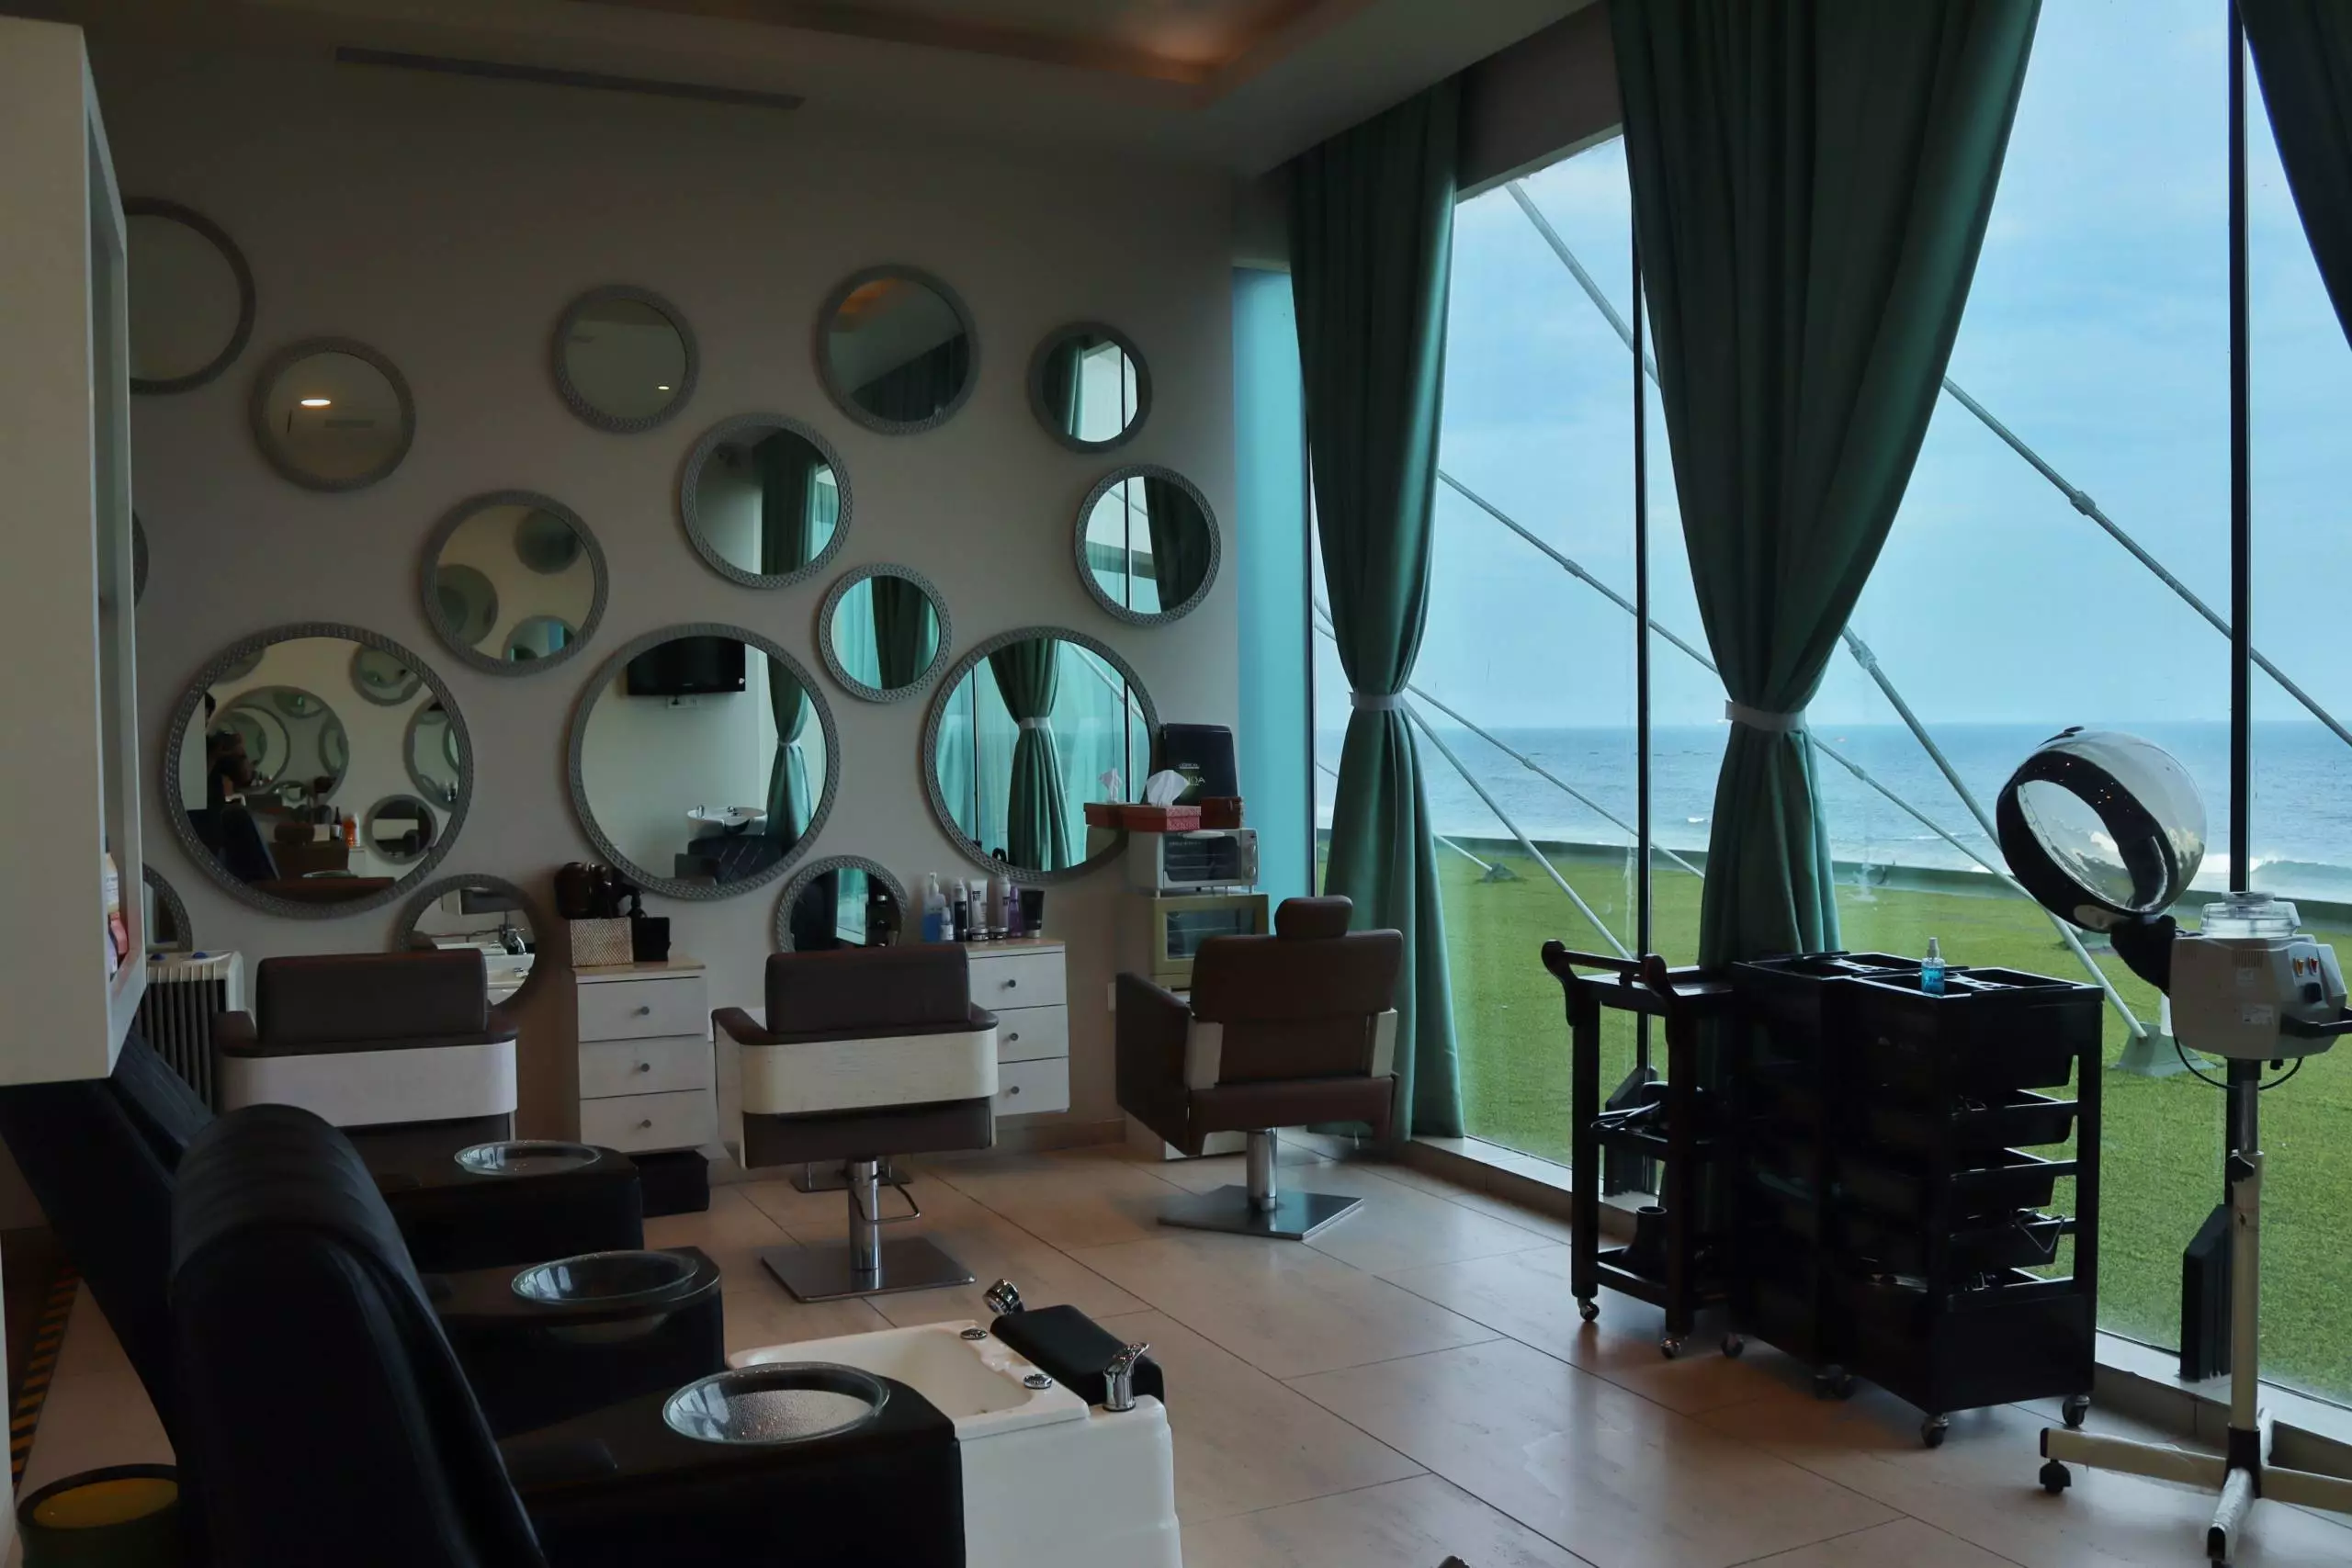 The Calm Spa & Salon is a thoughtfully designed holistic centre of wellness and salon services. 